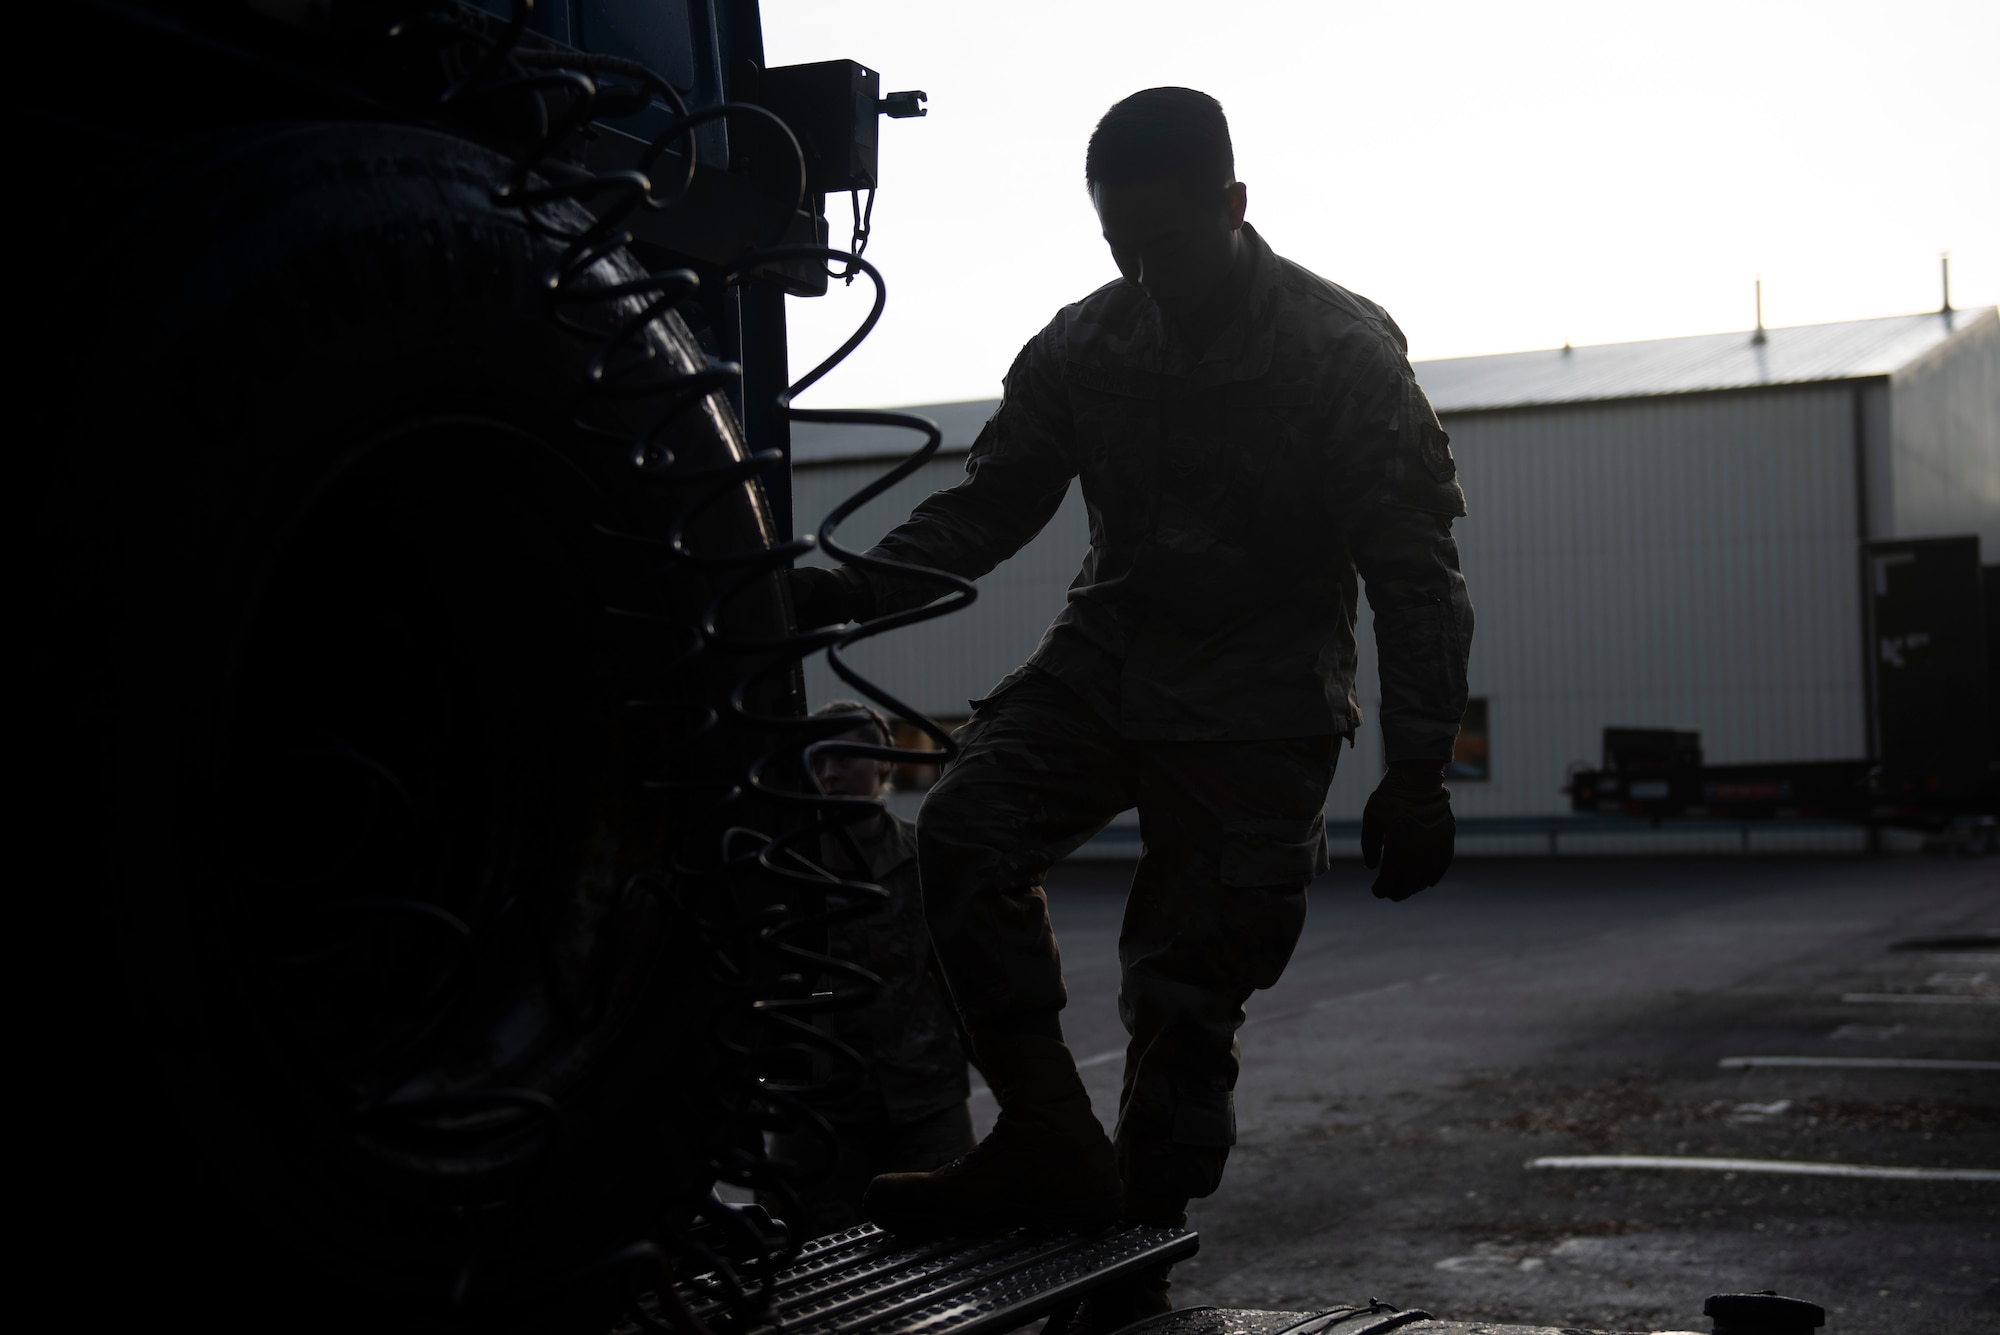 U.S. Air Force Airman 1st Class Kevin Souriyanyong, 48th Logistics Readiness Squadron ground transportation specialist, prepares a truck for cargo loading at Royal Air Force Lakenheath, England, Oct 15, 2020. The vehicular operations flight maintains over 80 vehicles within its fleet. (U.S. Air Force photo by Airman 1st Class Anthony Clingerman)